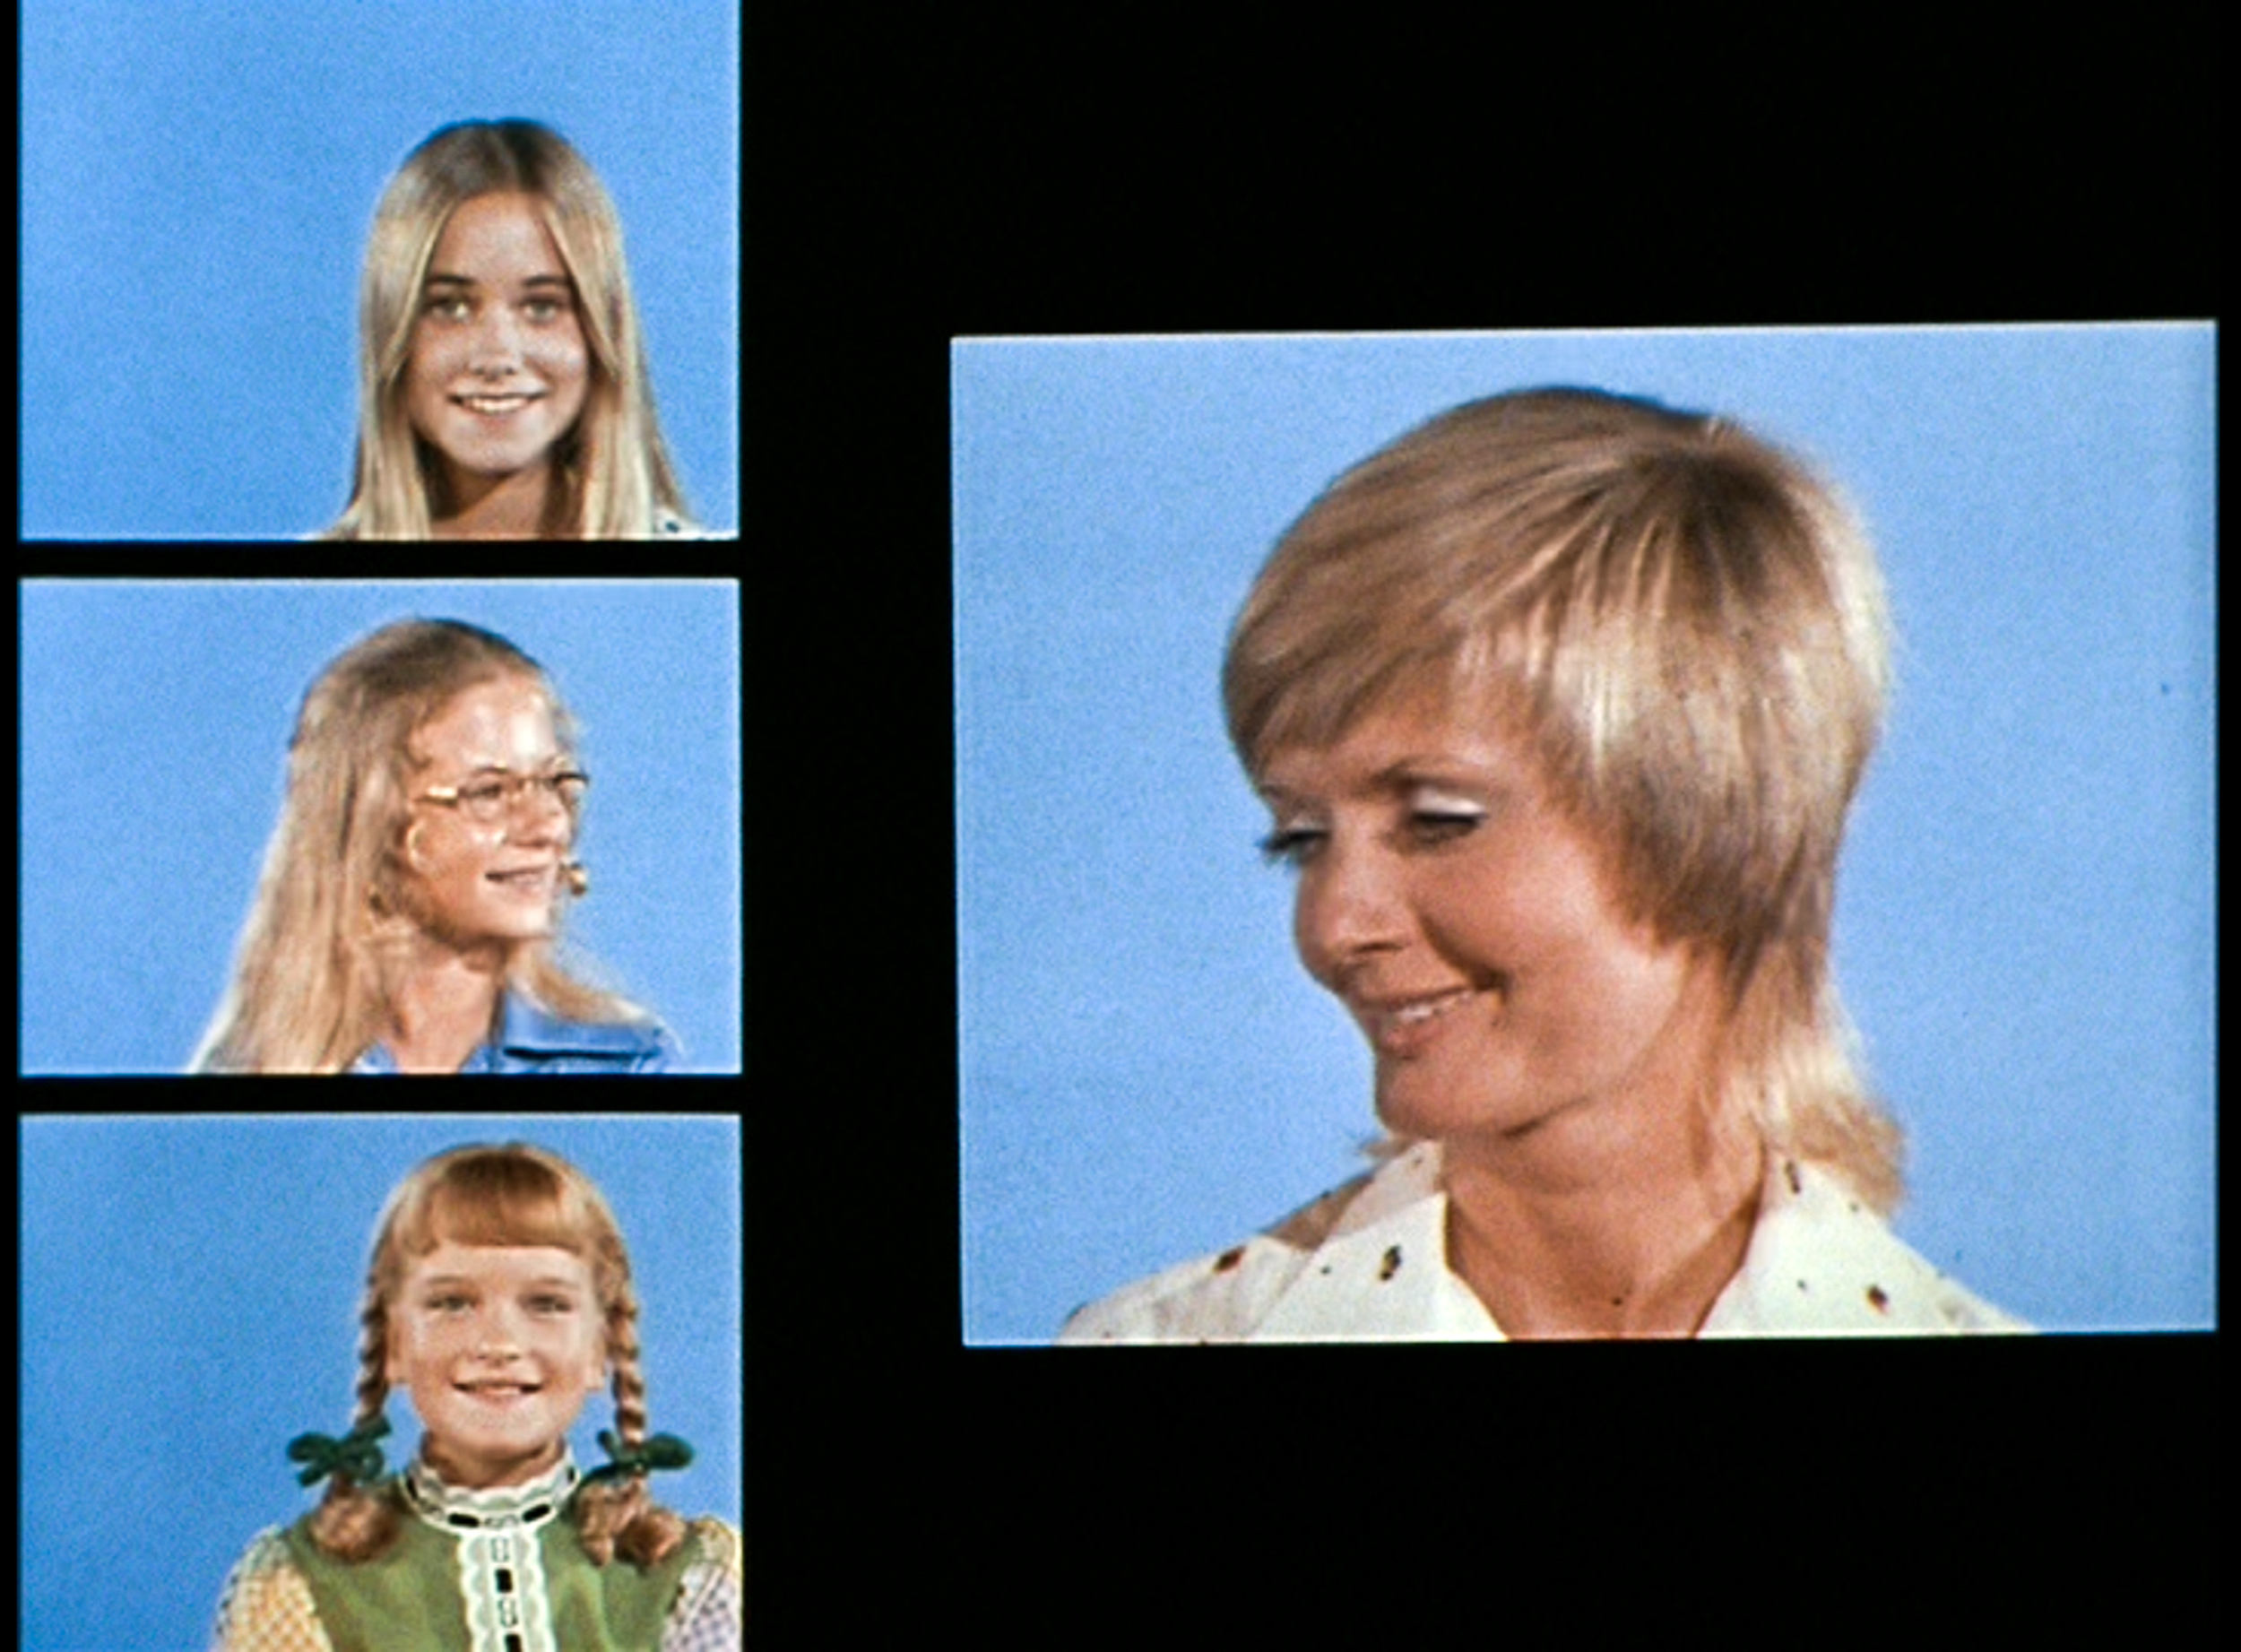 Maureen McCormick, Eve Plumb, Susan Olsen, and Florence Henderson as Marcia, Jan,  Cindy, and Carol Brady in "The Brady Bunch" in Los Angeles, 1972 | Source: Getty Images